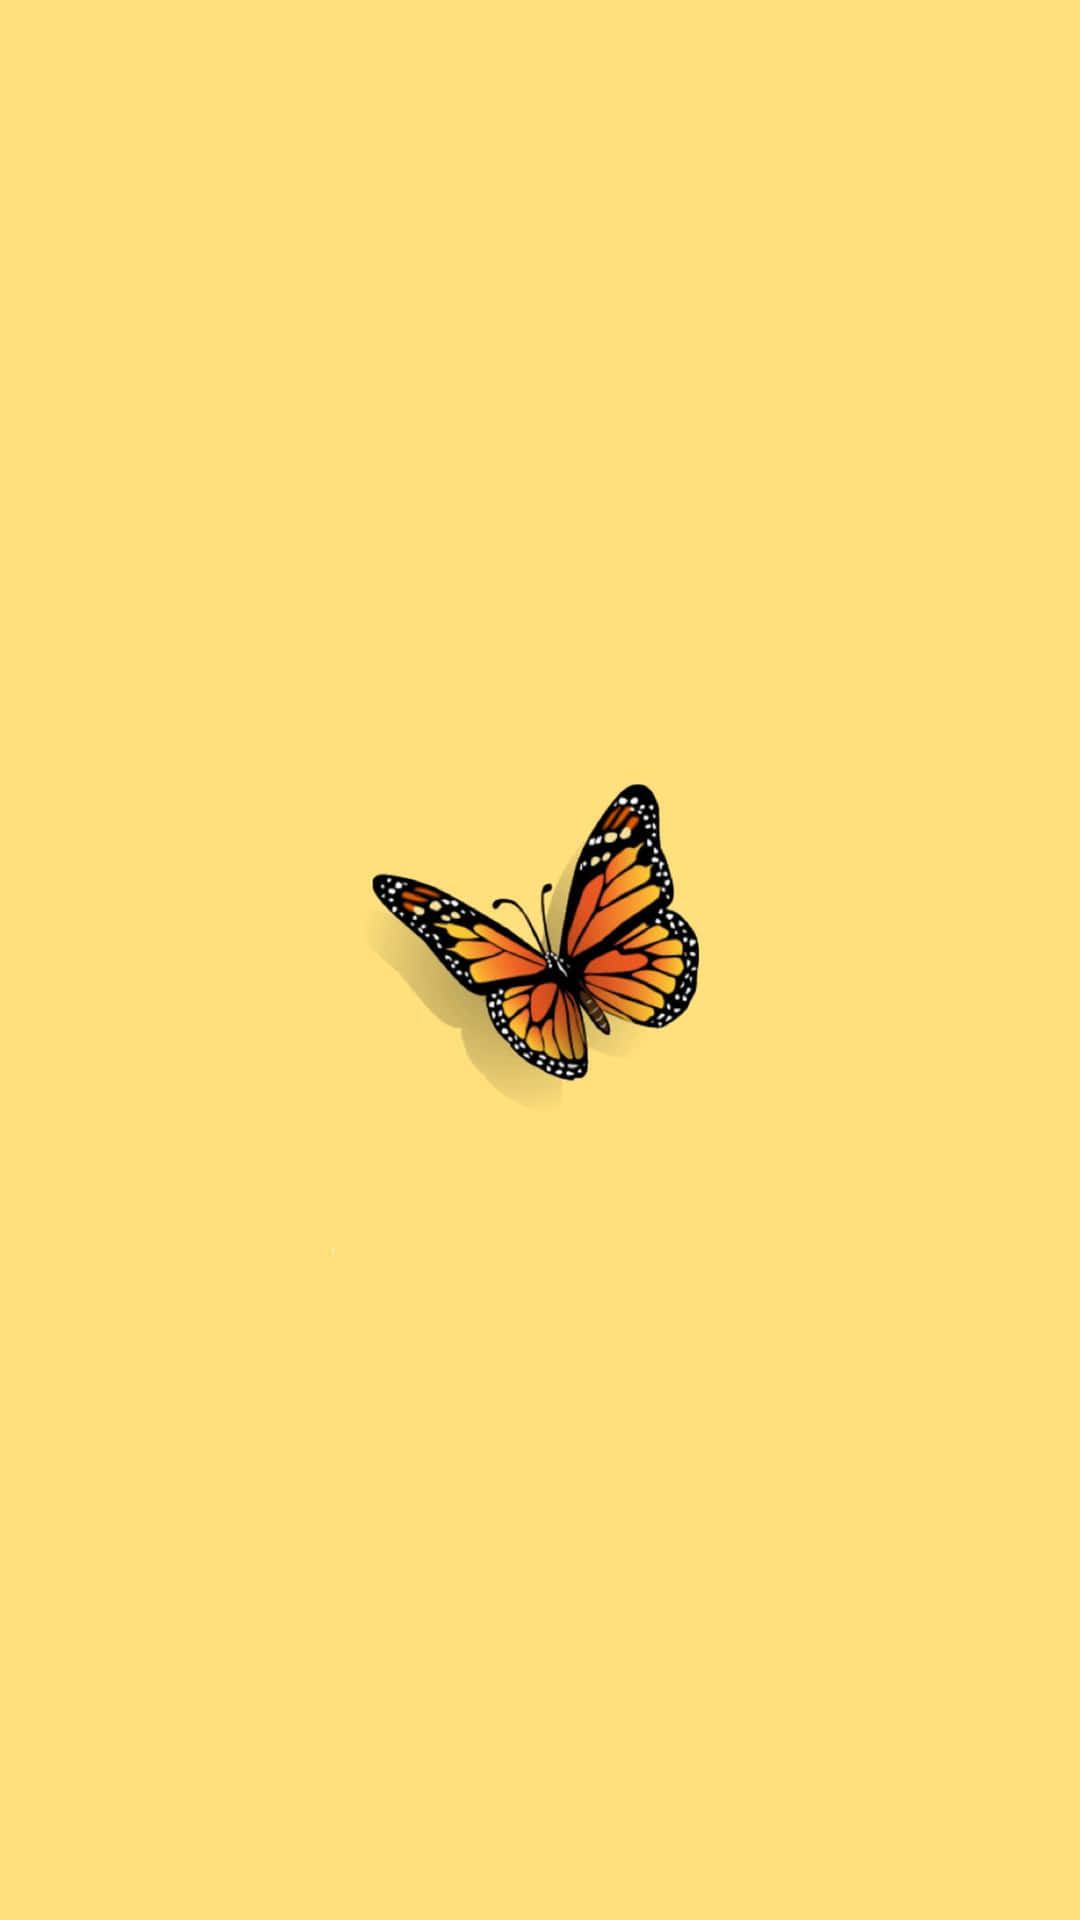 Monarch Butterfly Yellow Aesthetic Illustration Wallpaper